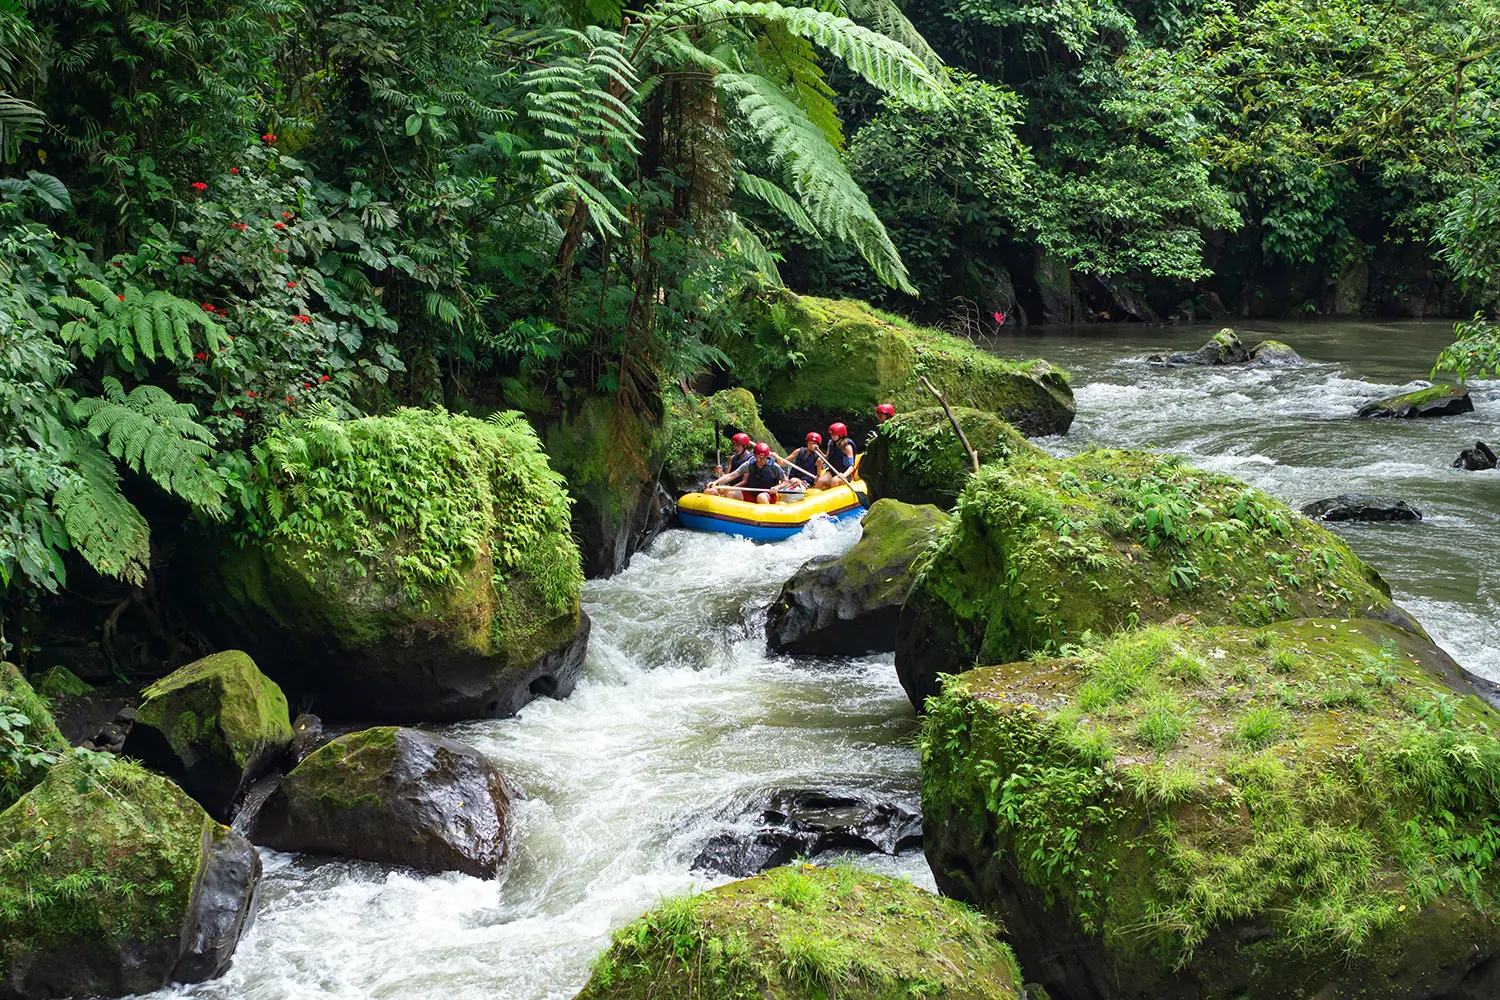 Rafting on the Ayung River in Bali